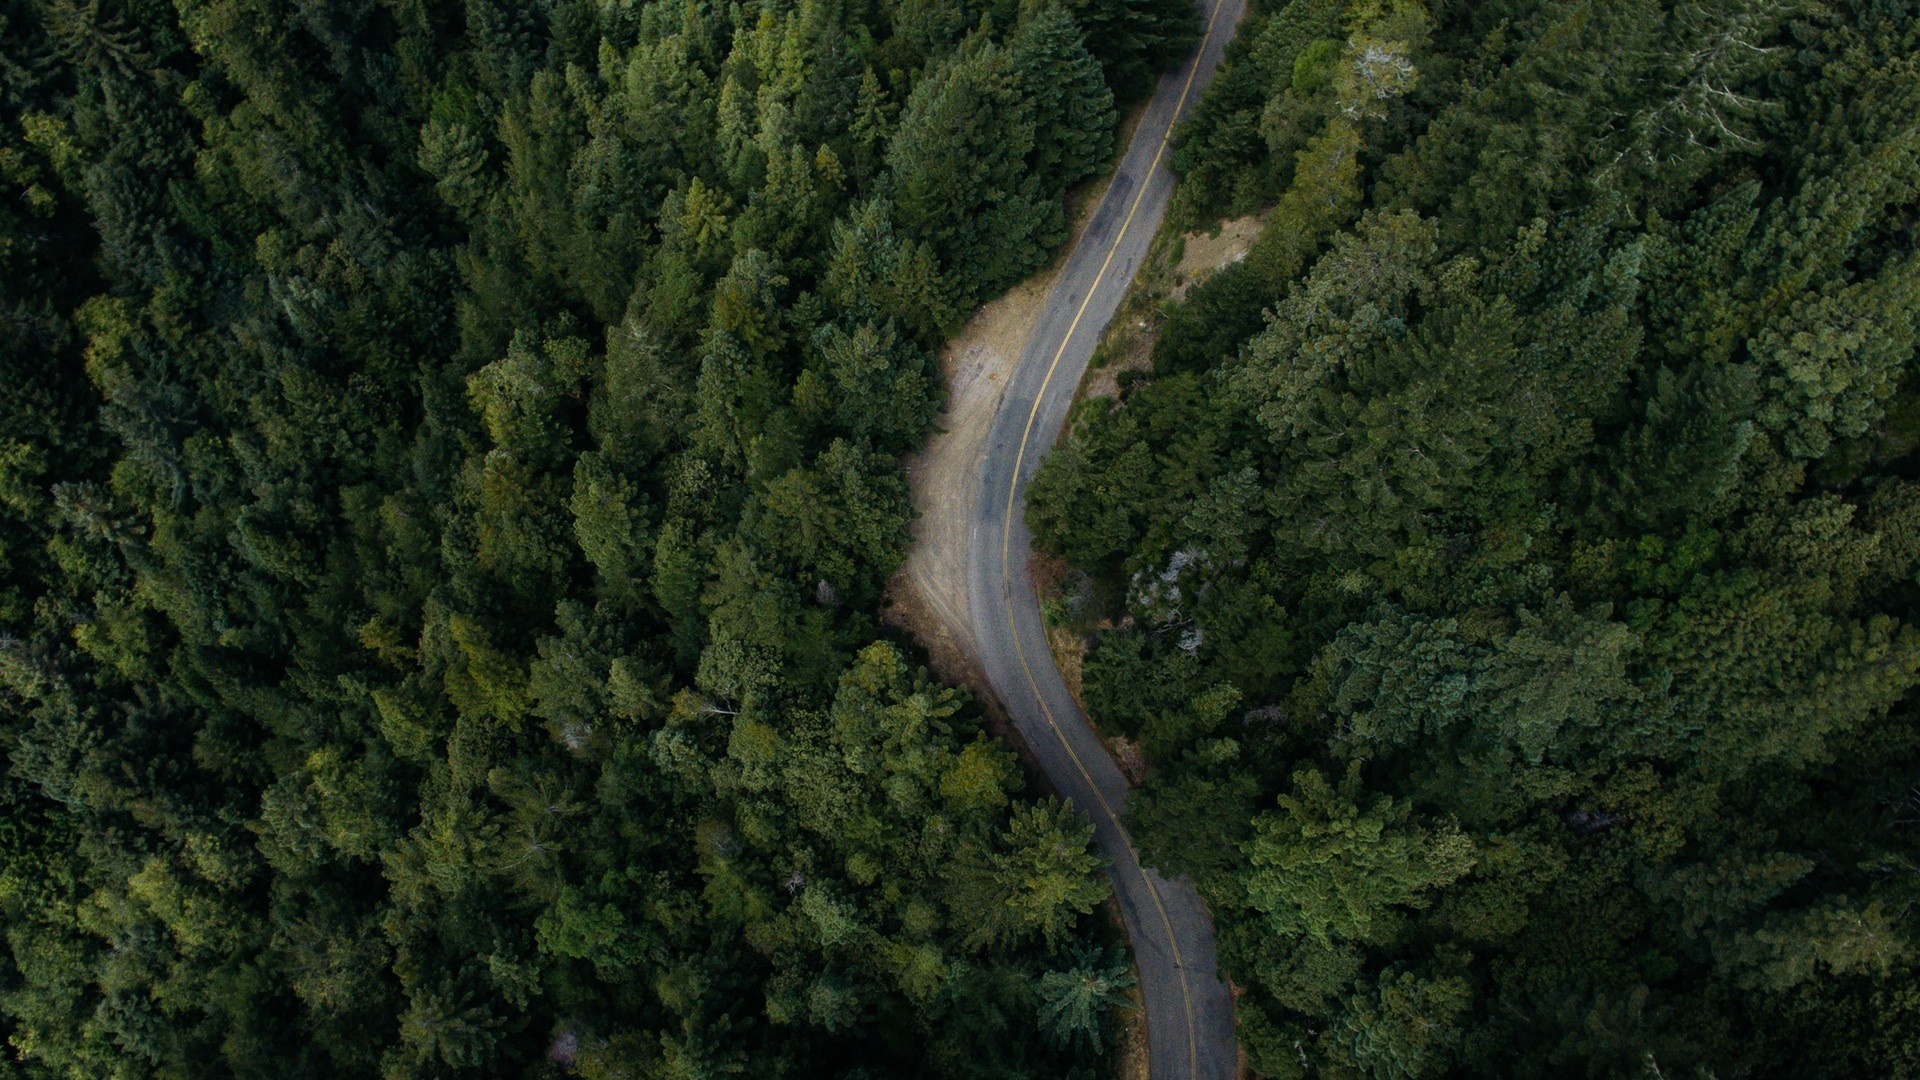 General 1920x1080 nature trees road aerial view street forest green